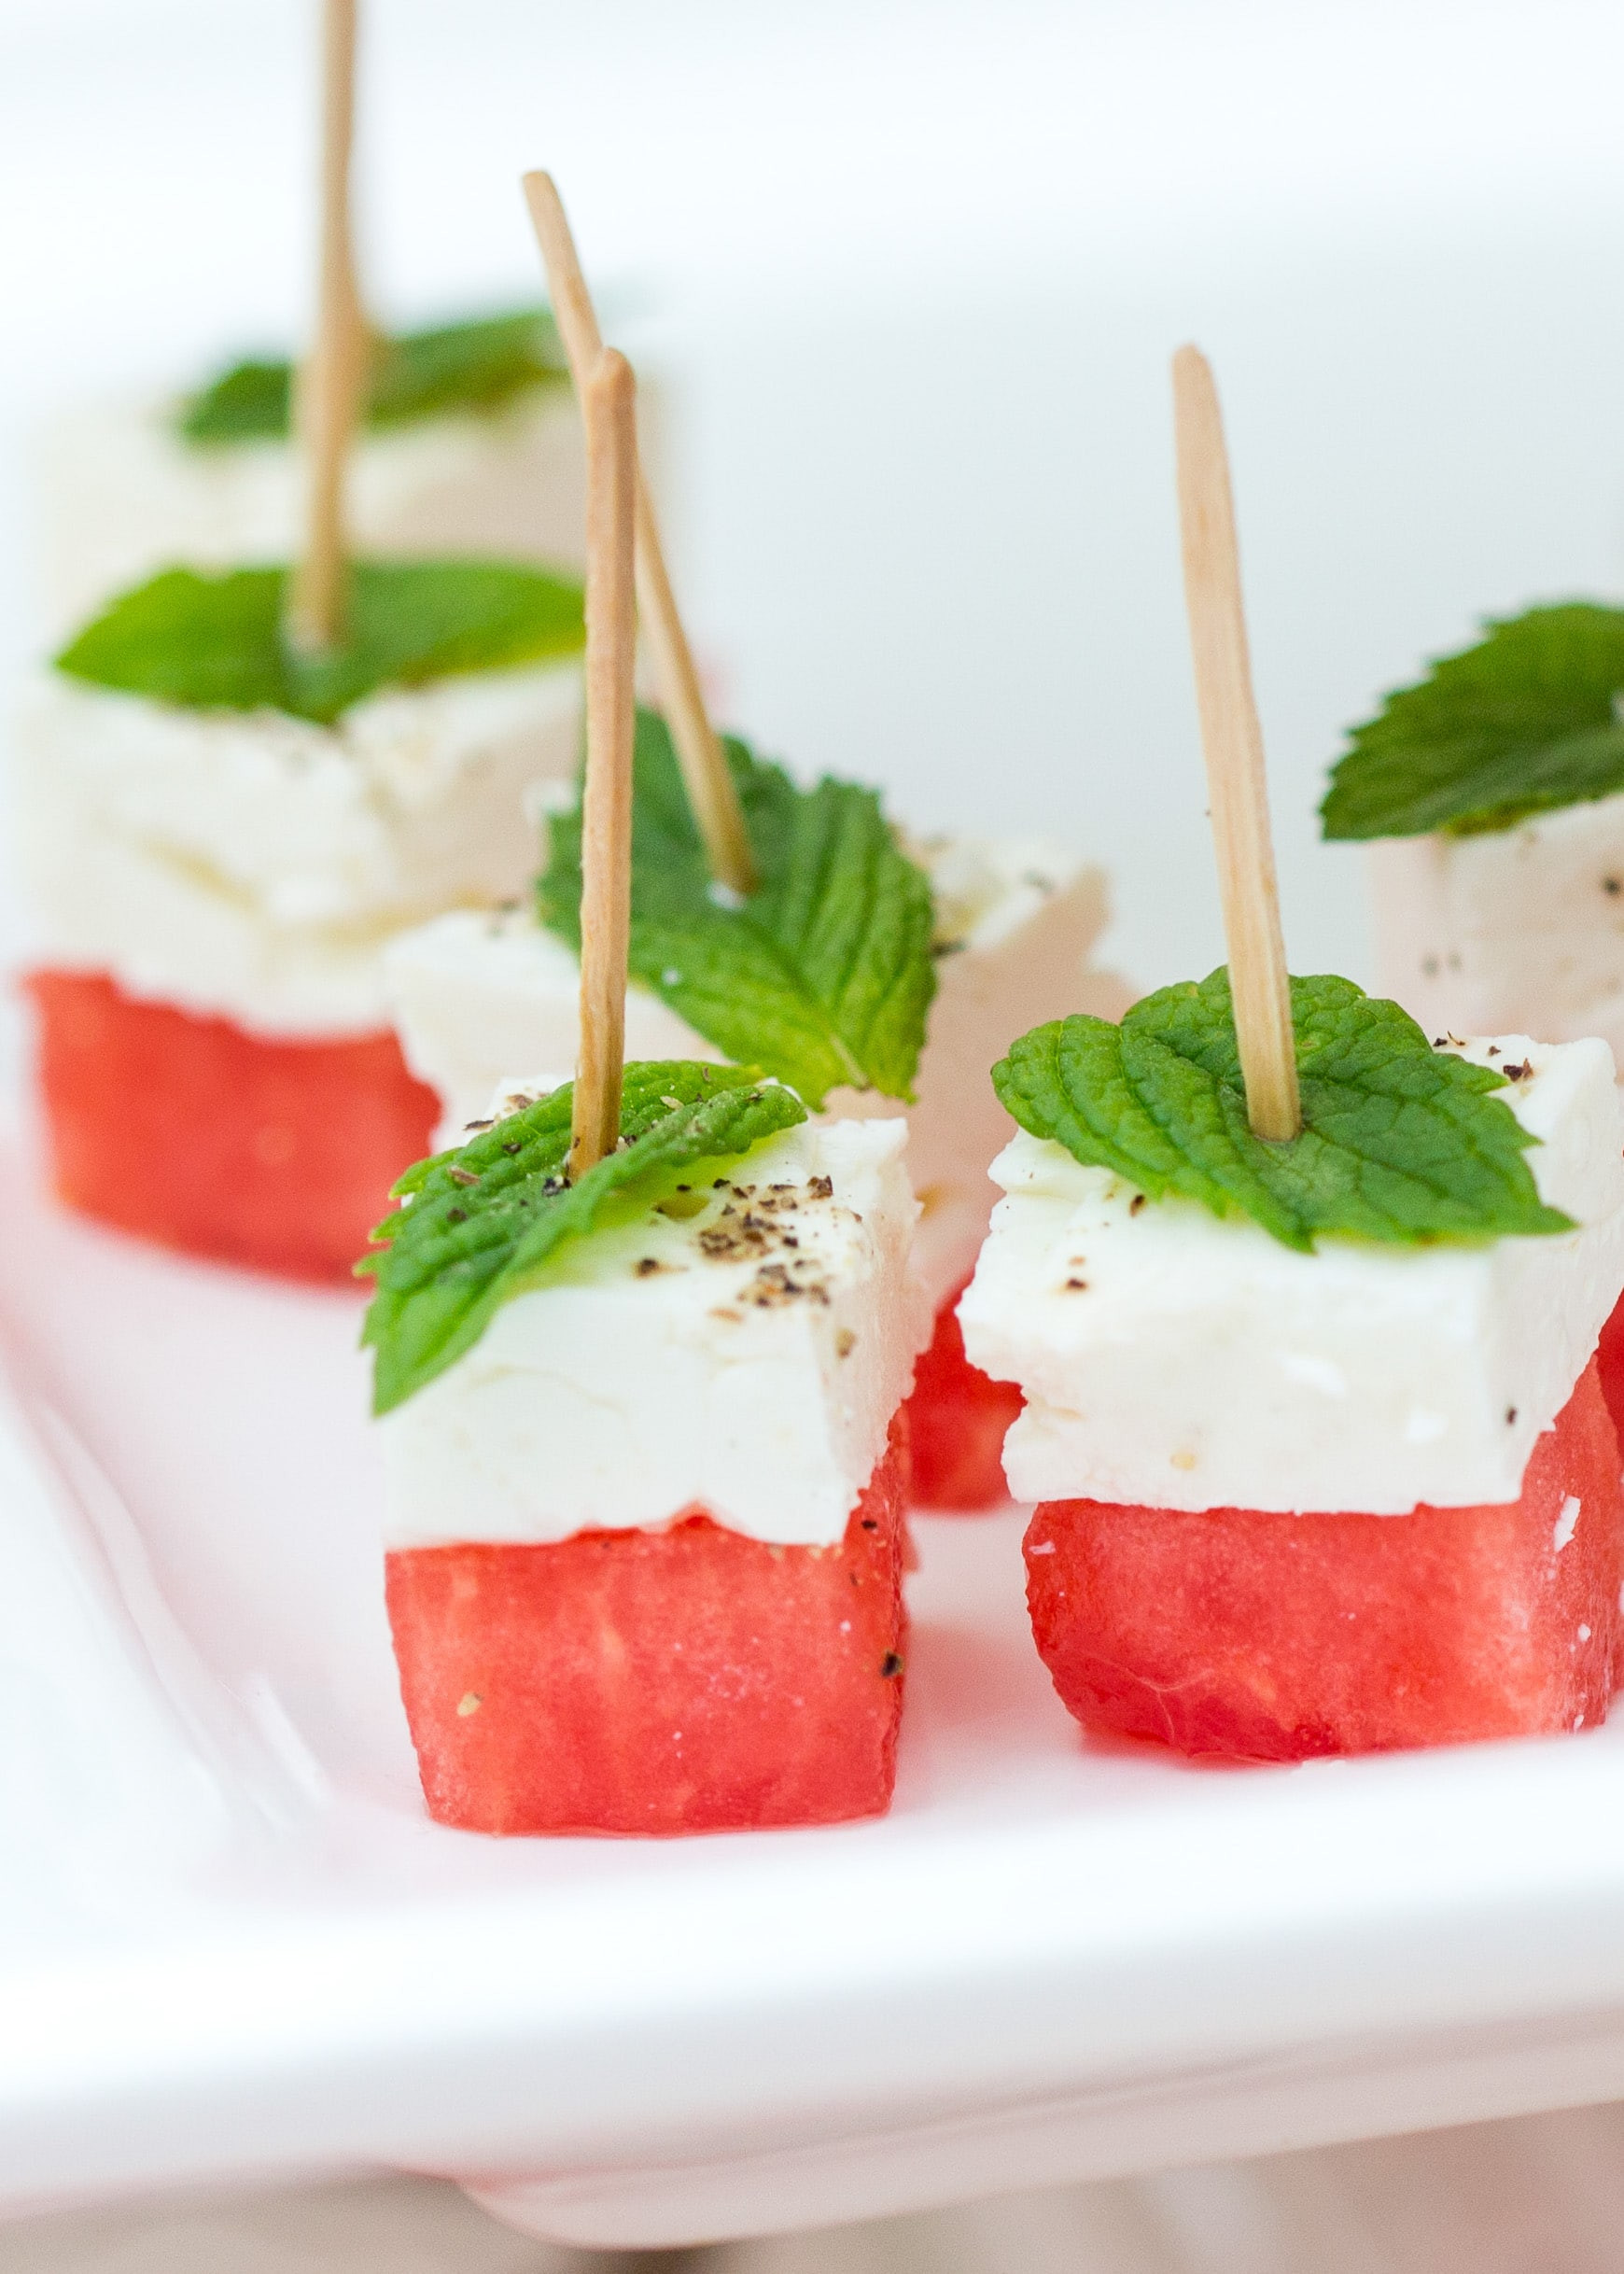 Easy Healthy Appetizers For Parties
 Healthy Summer Appetizers Easy & Delish Pizzazzerie